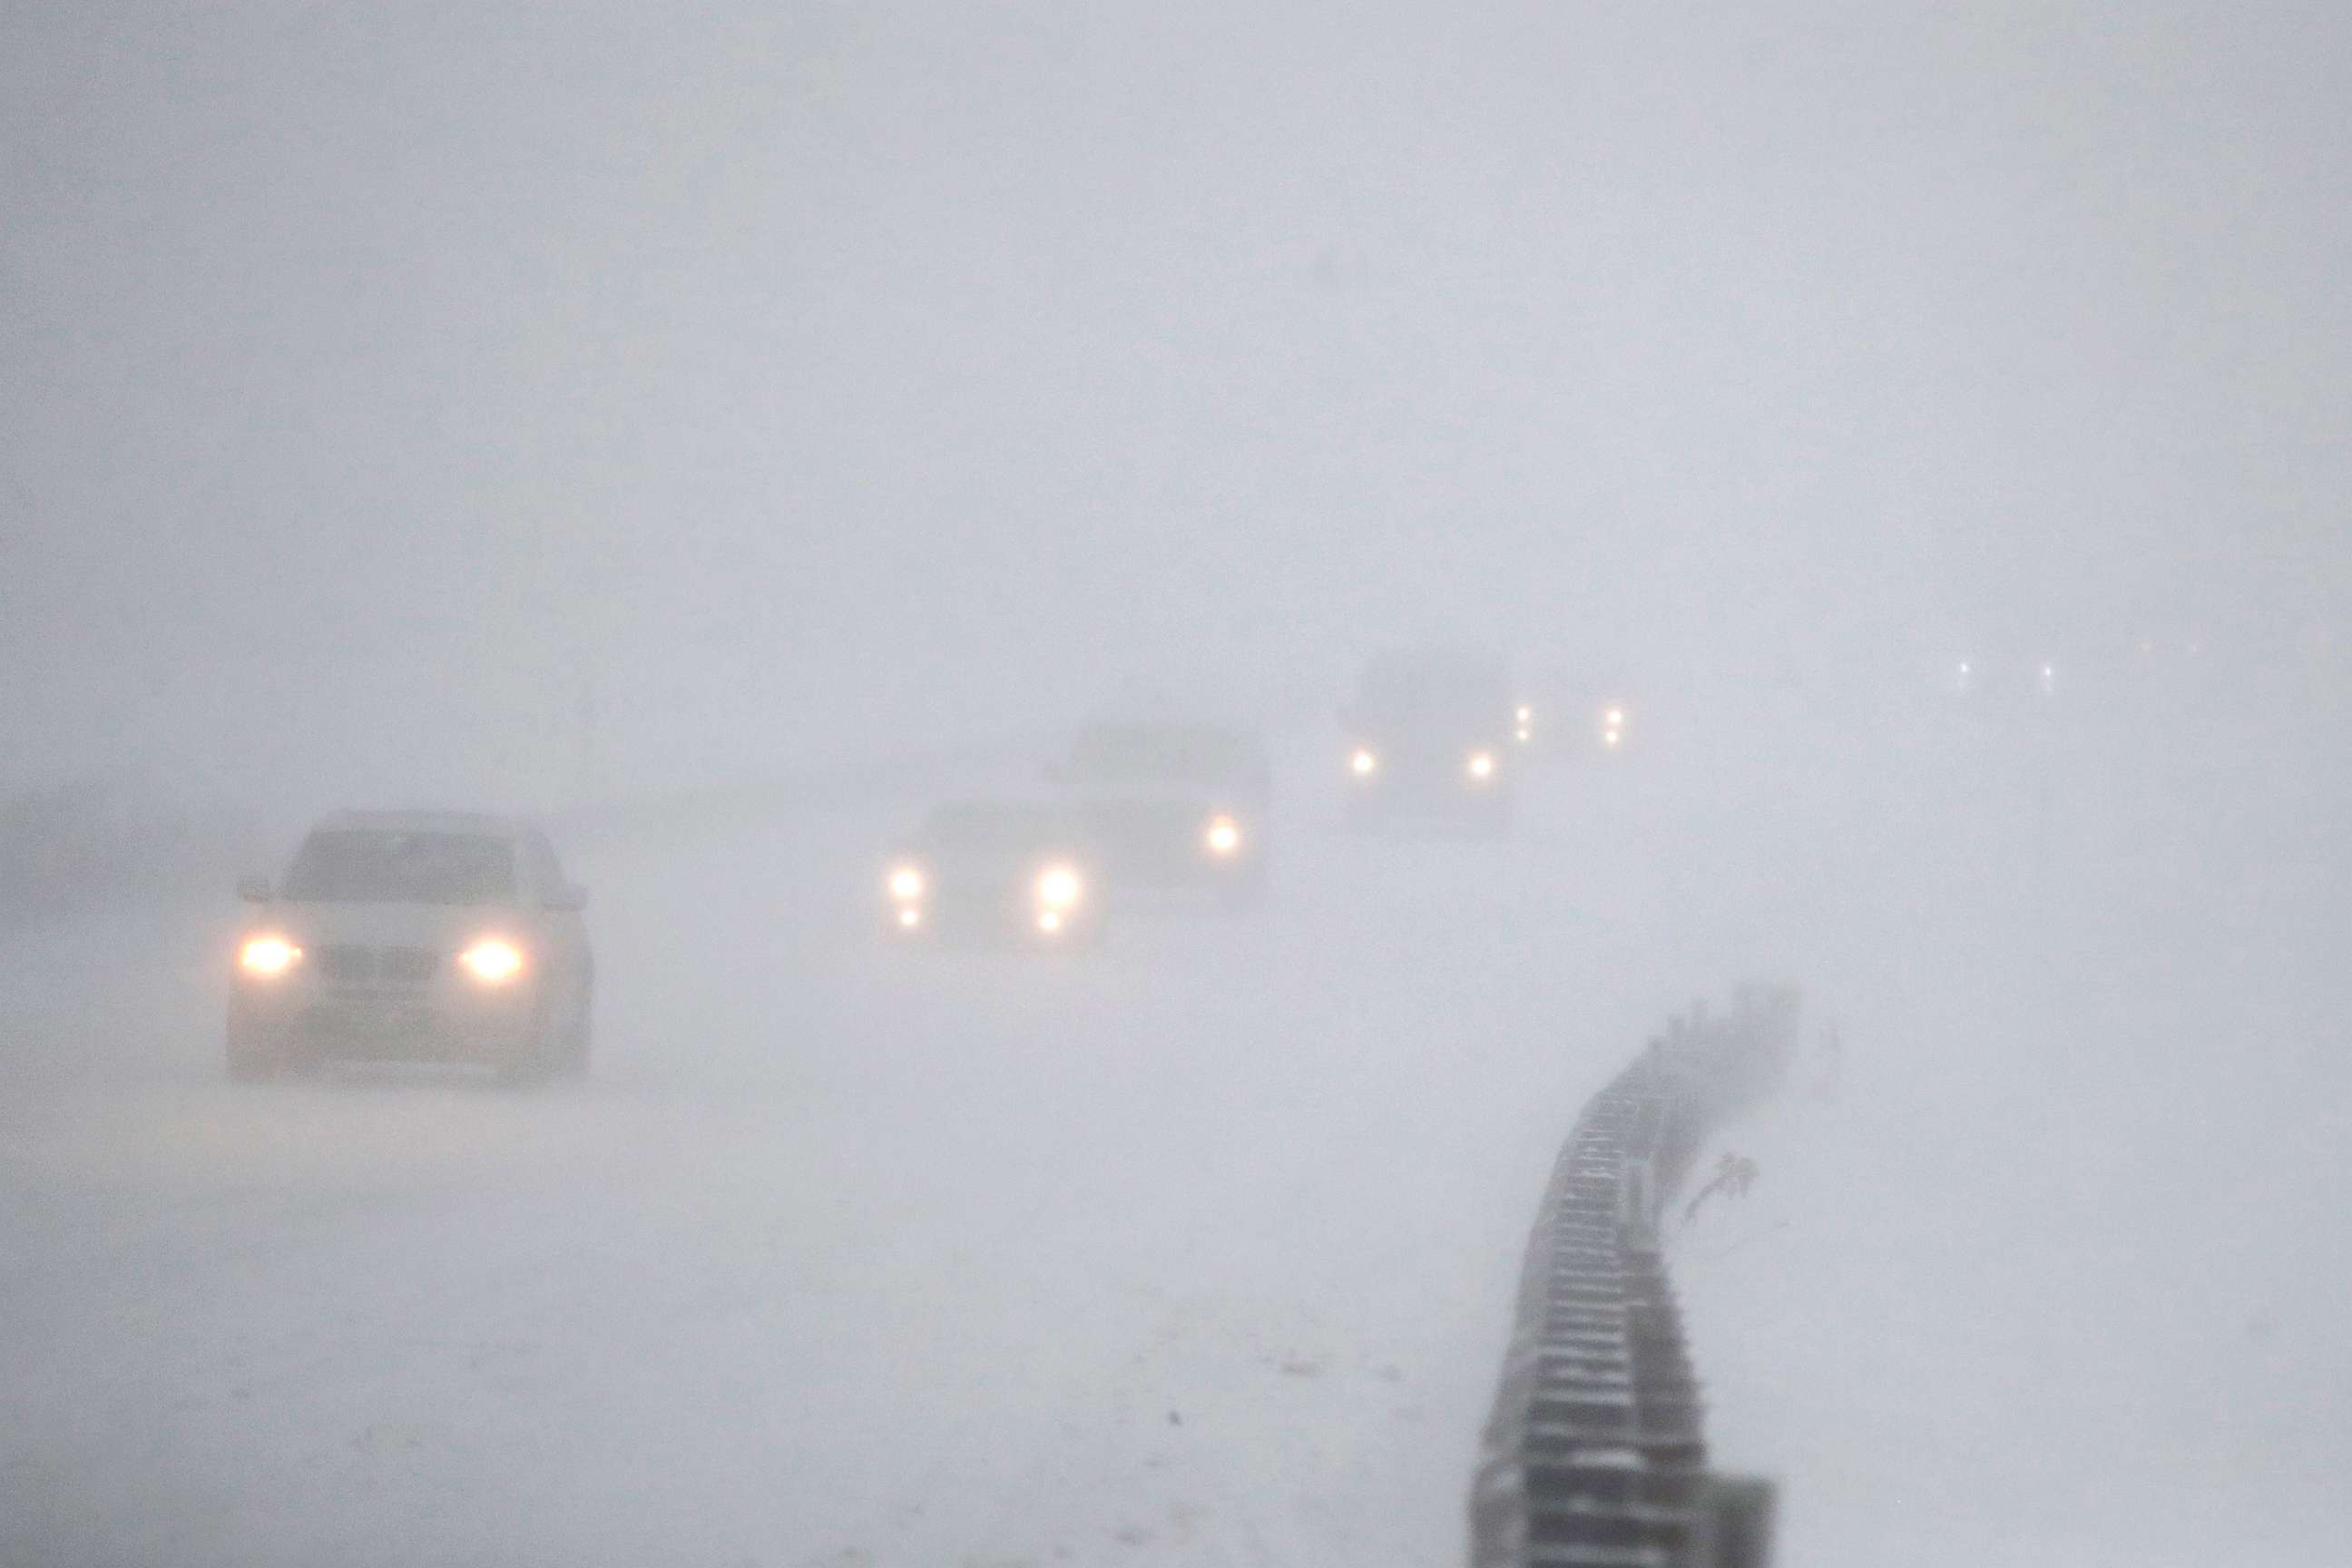 PHOTO: Vehicles commute southbound on the Garden State Parkway in whiteout conditions during a snowstorm, Jan. 4, 2018, in Eatontown, N.J. 